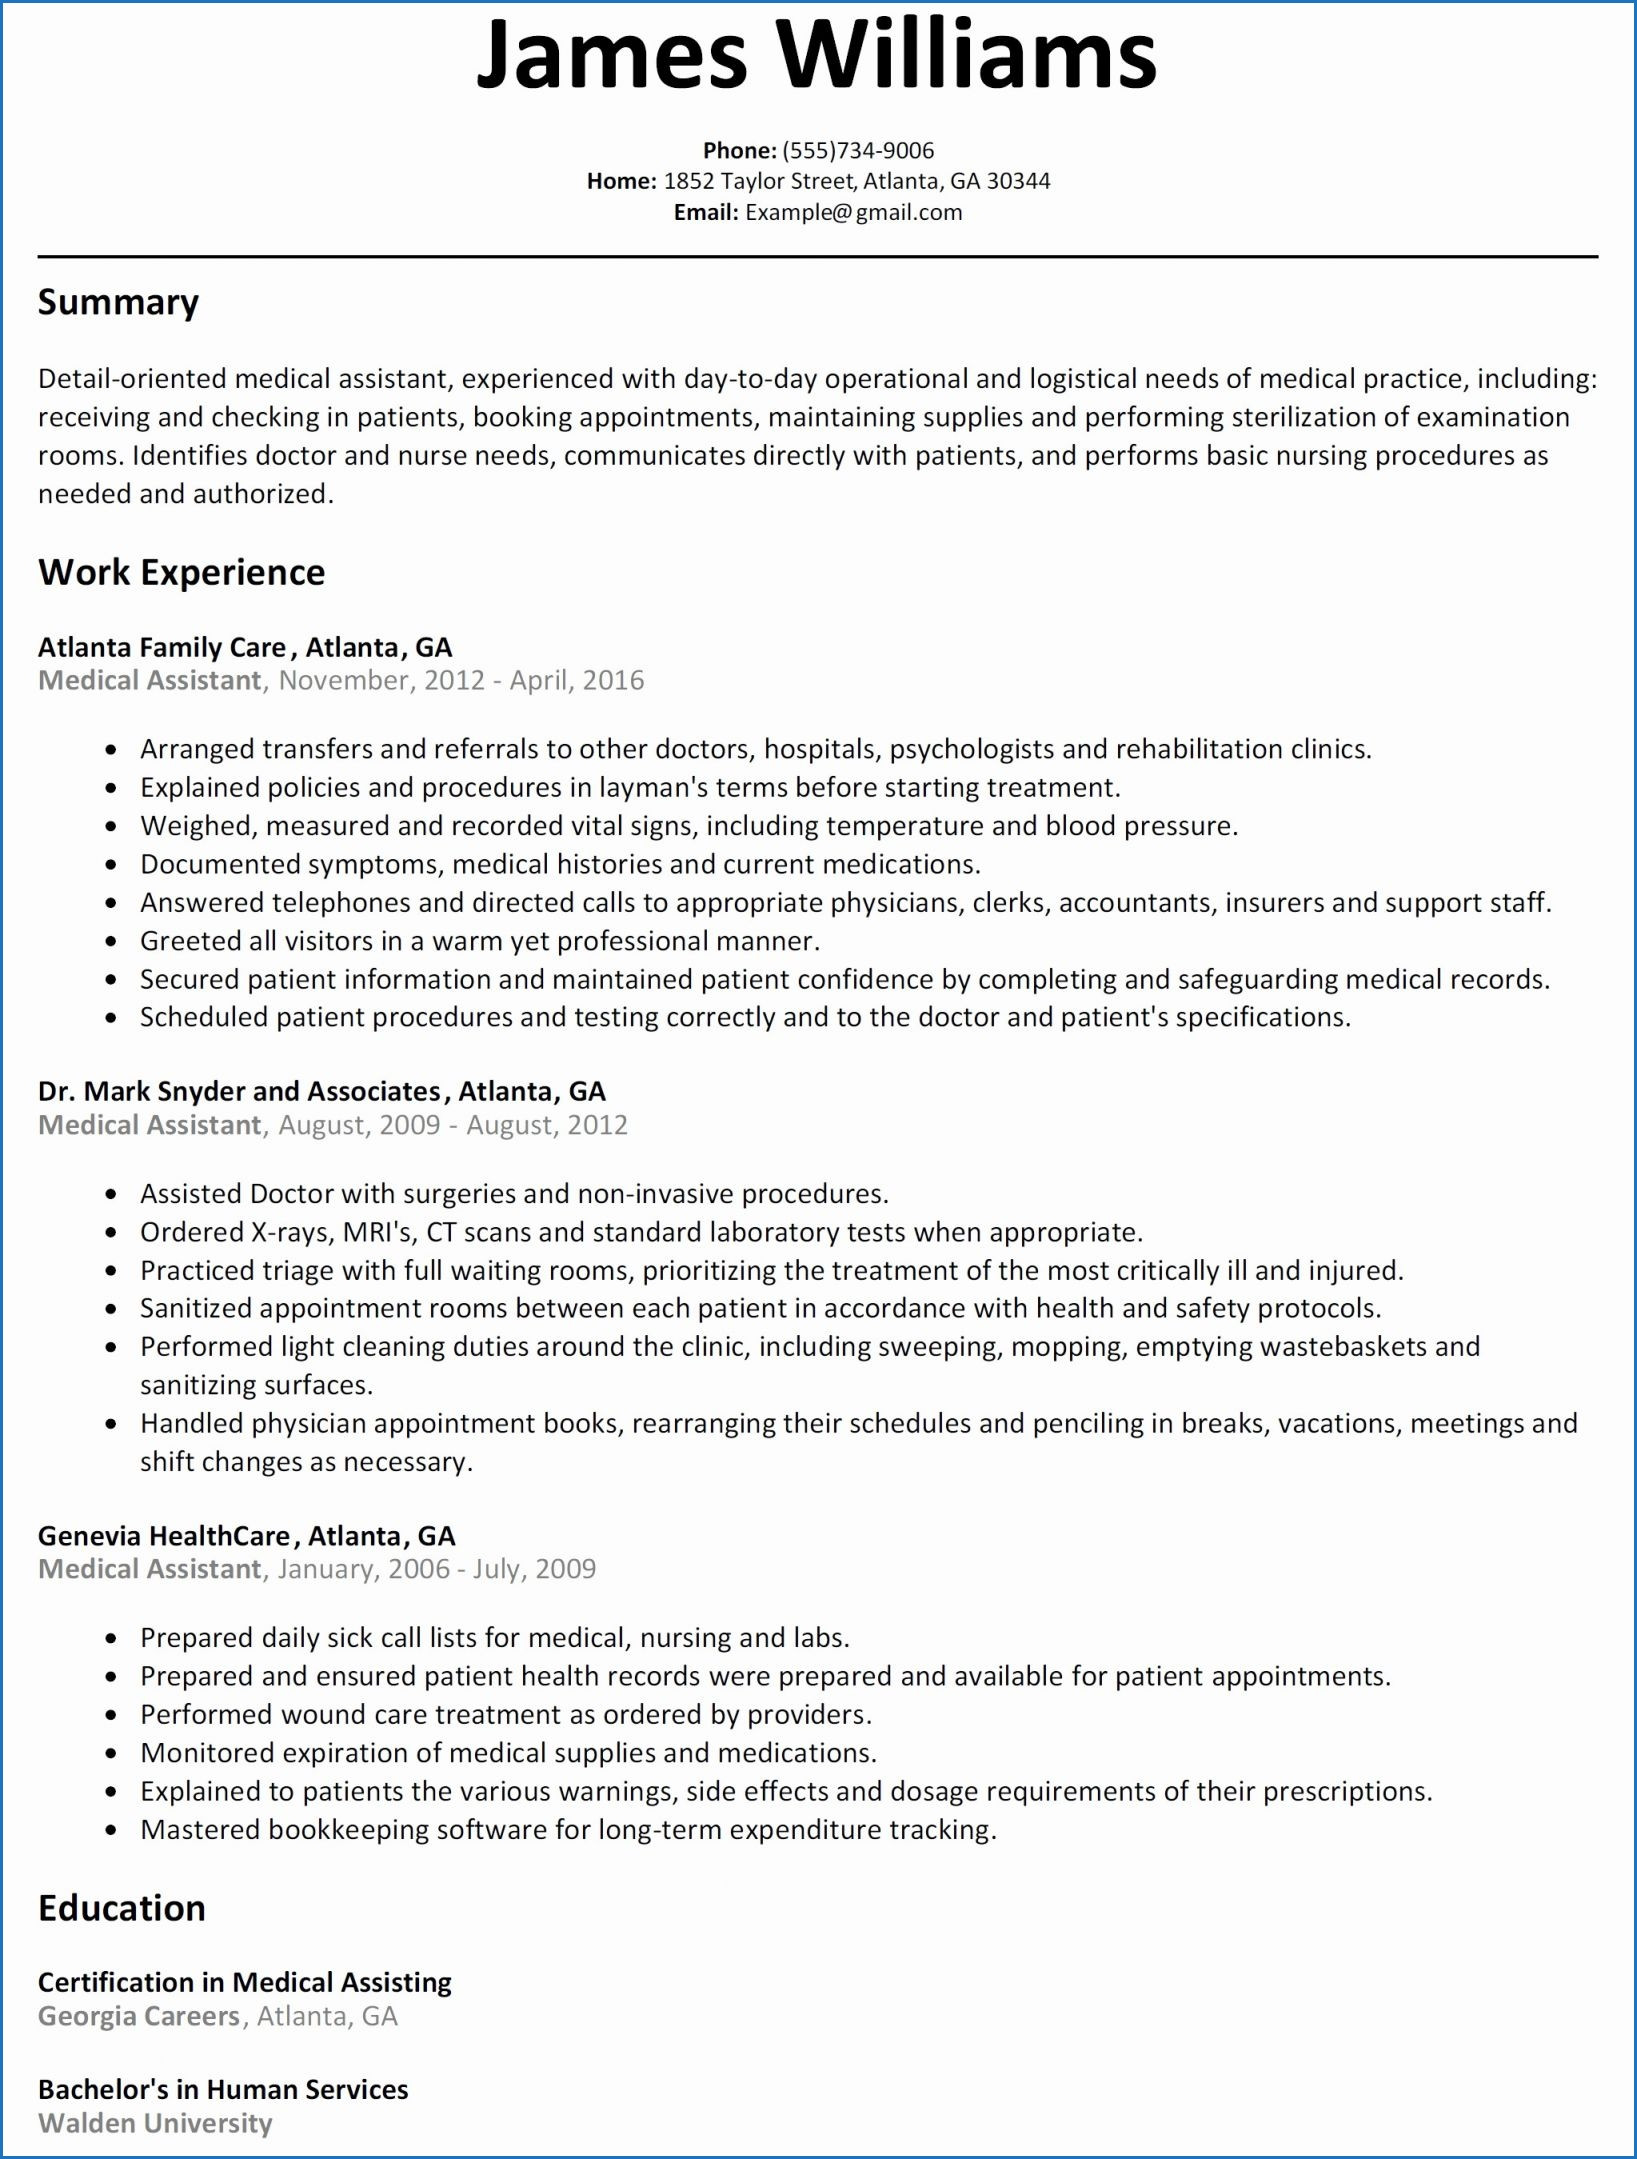 Resume Cover Letter Example Statistician Cover Letter Examples 15 Example Educational Diagnostician Resume Resume Collection Of Statistician Cover Letter resume cover letter example|wikiresume.com